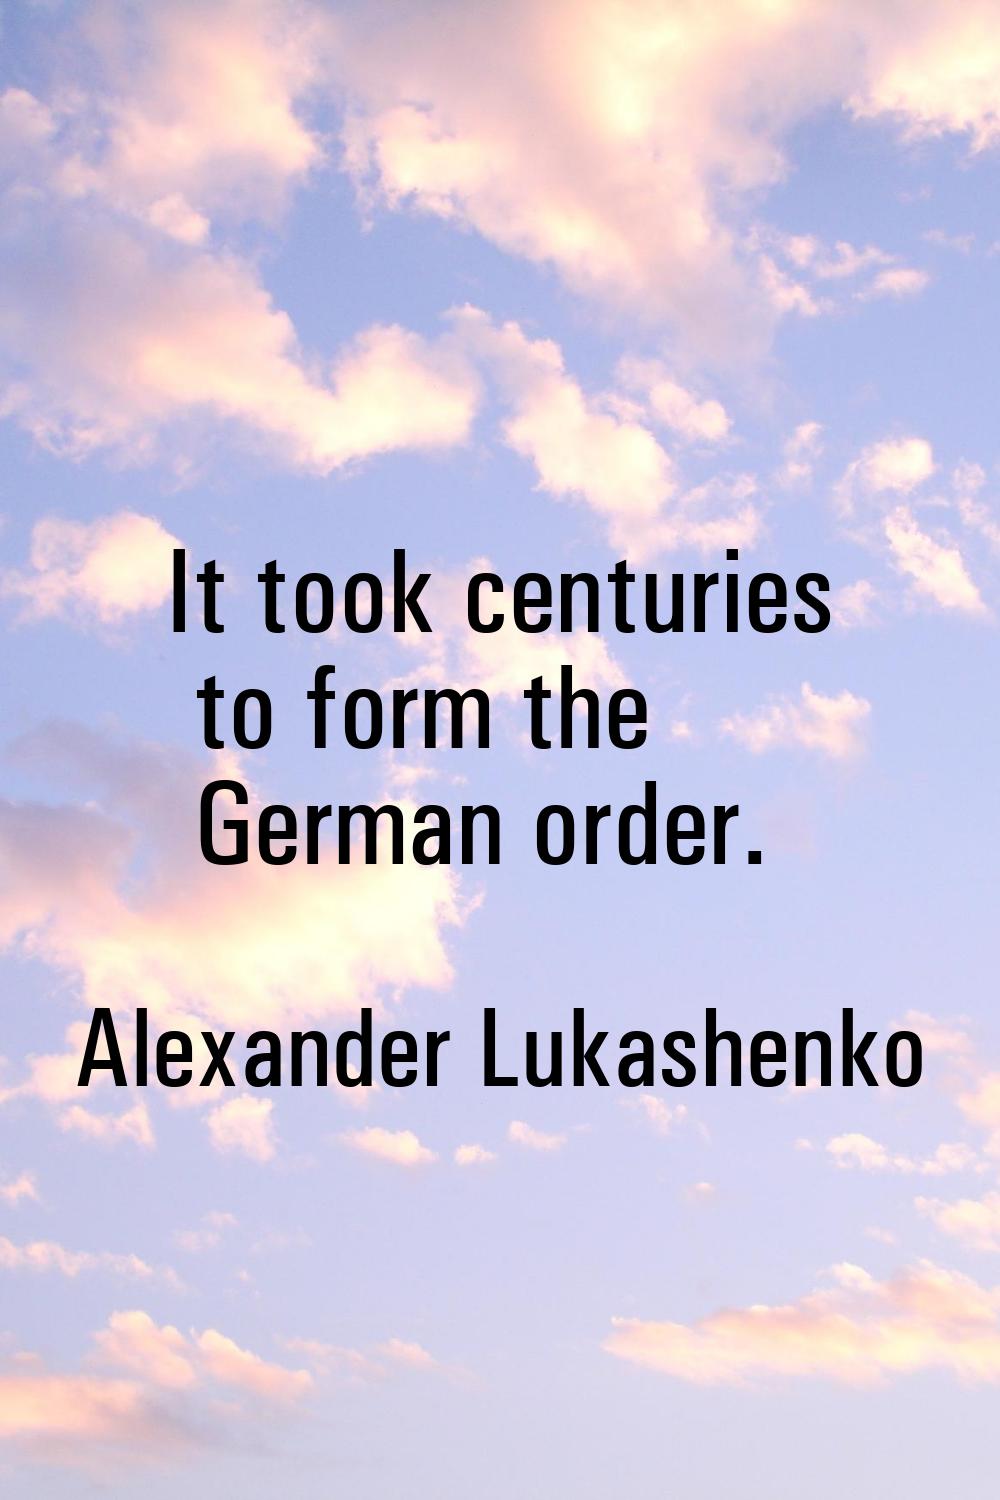 It took centuries to form the German order.